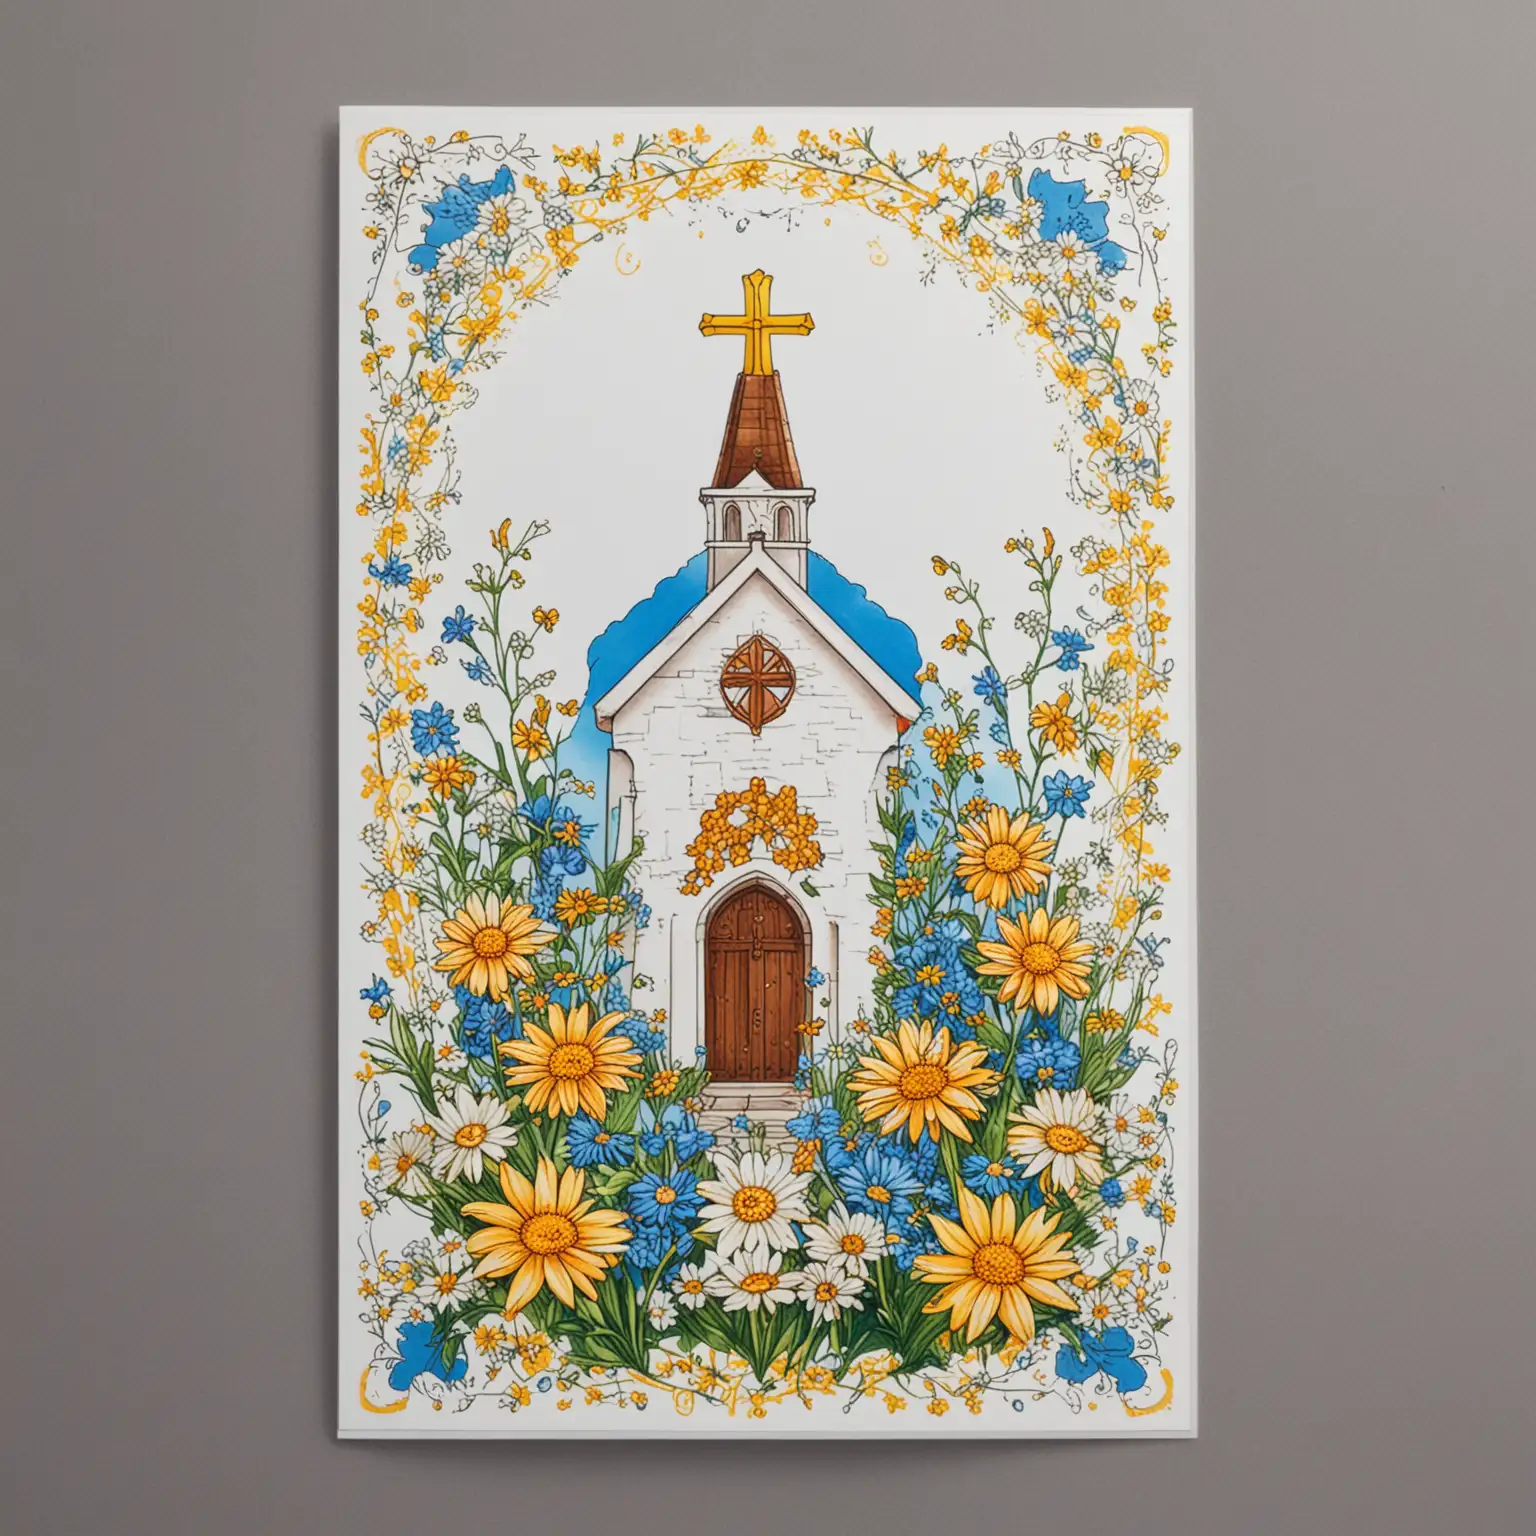 Easter-Church-Card-with-Bright-Colored-Flowers-and-Ornate-Cross